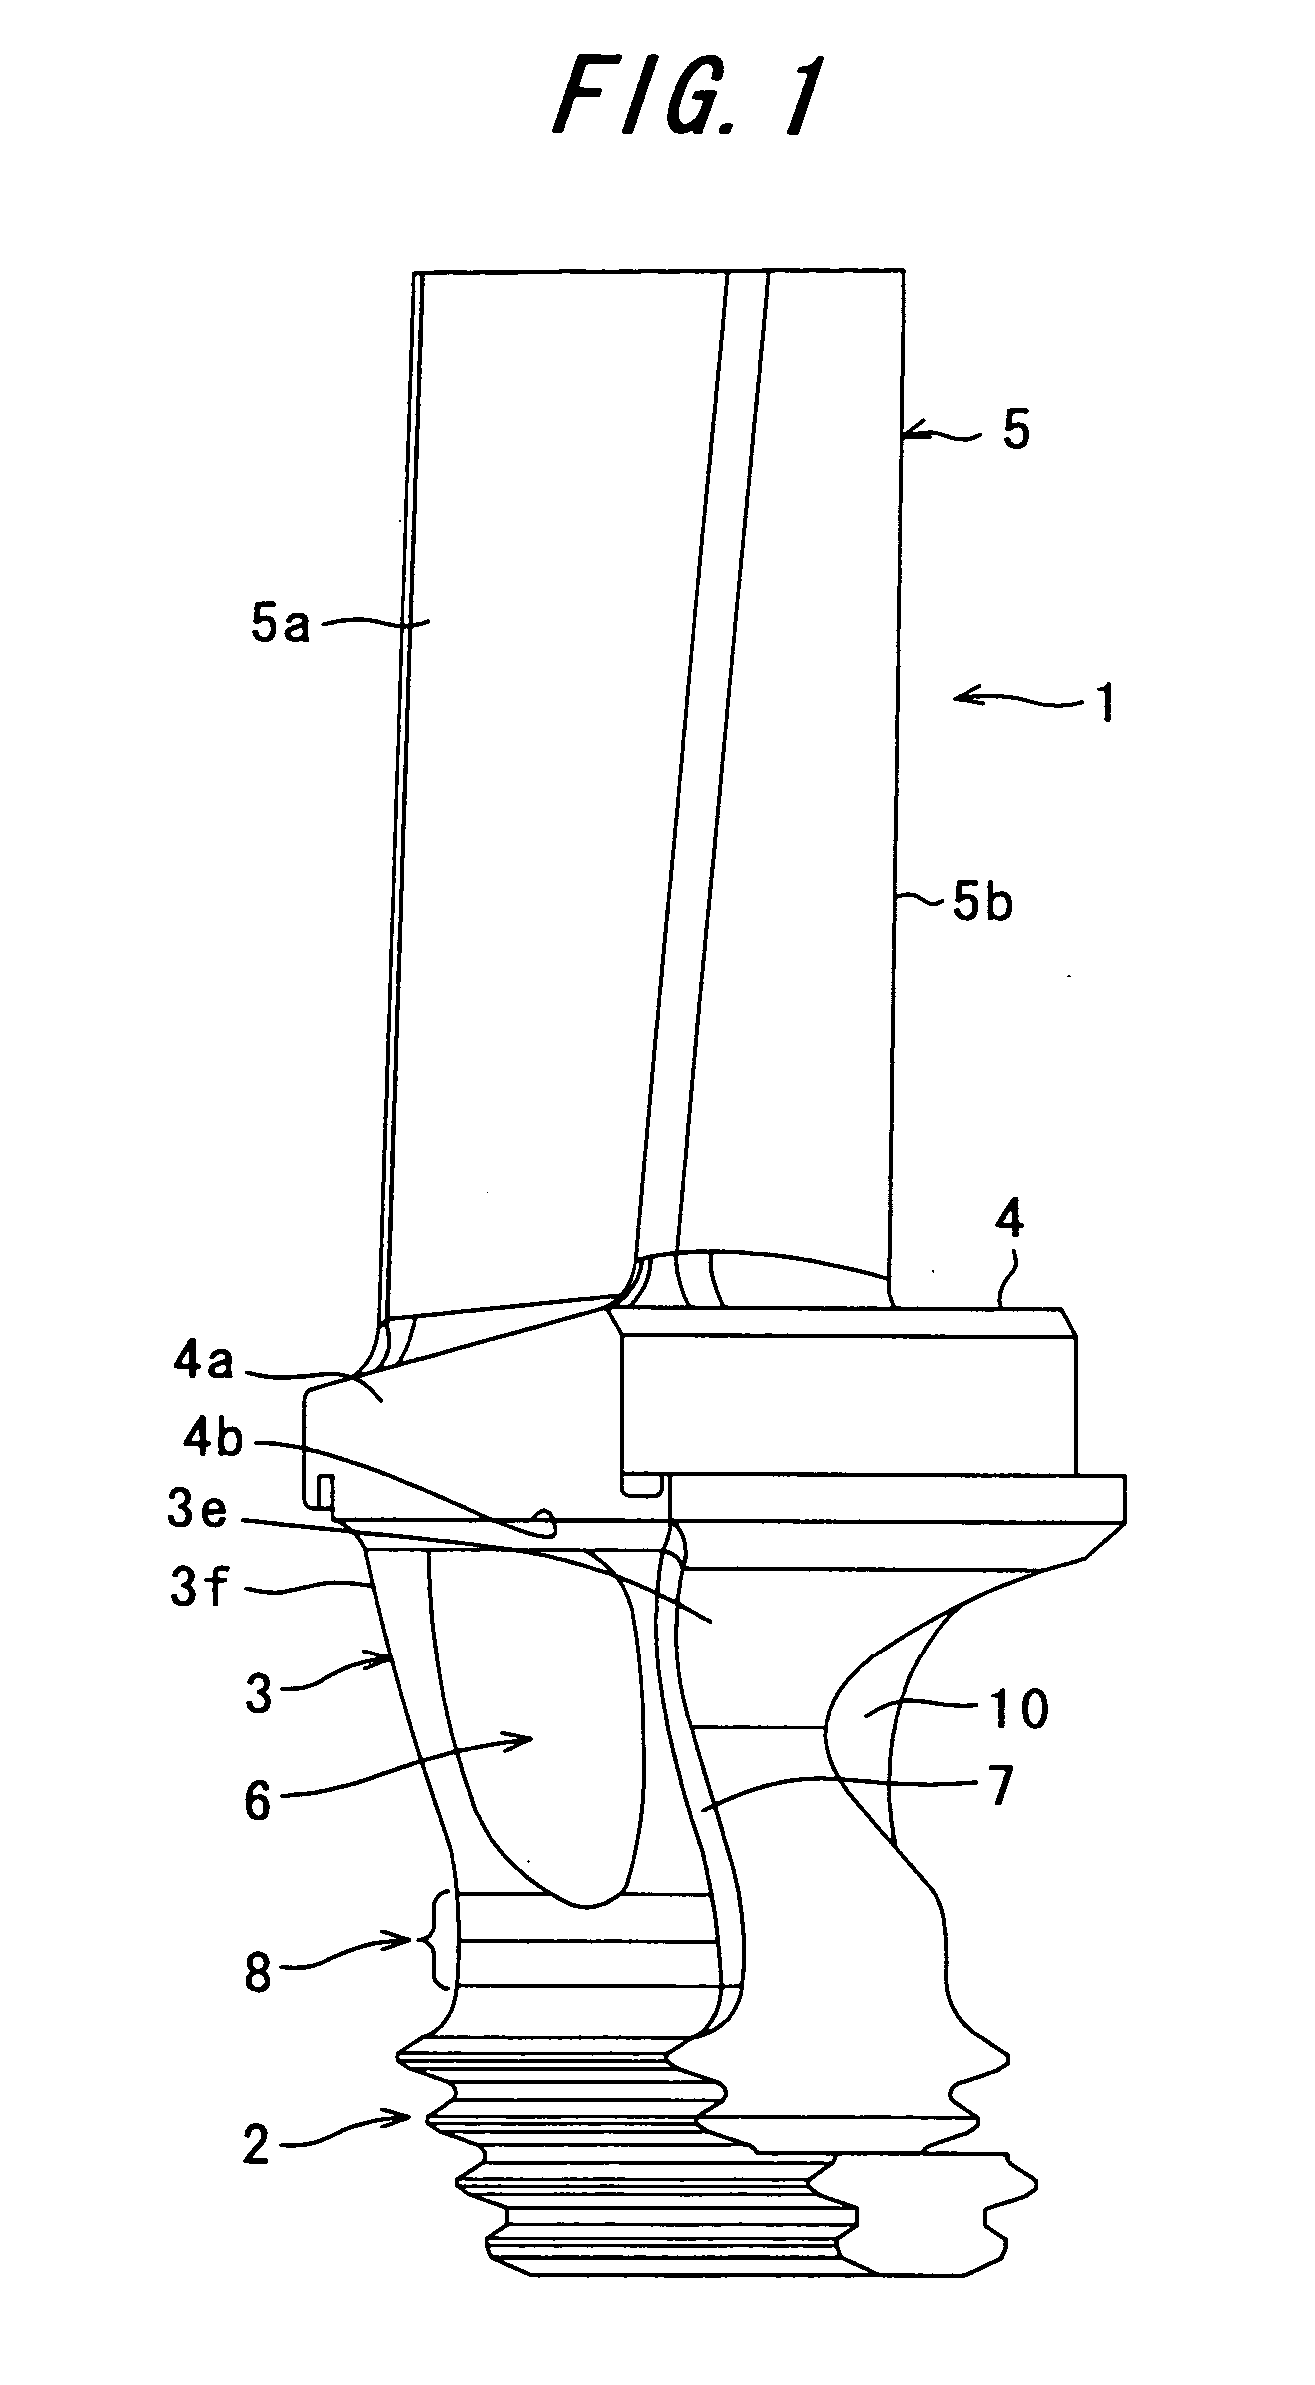 Moving blade and gas turbine using the same